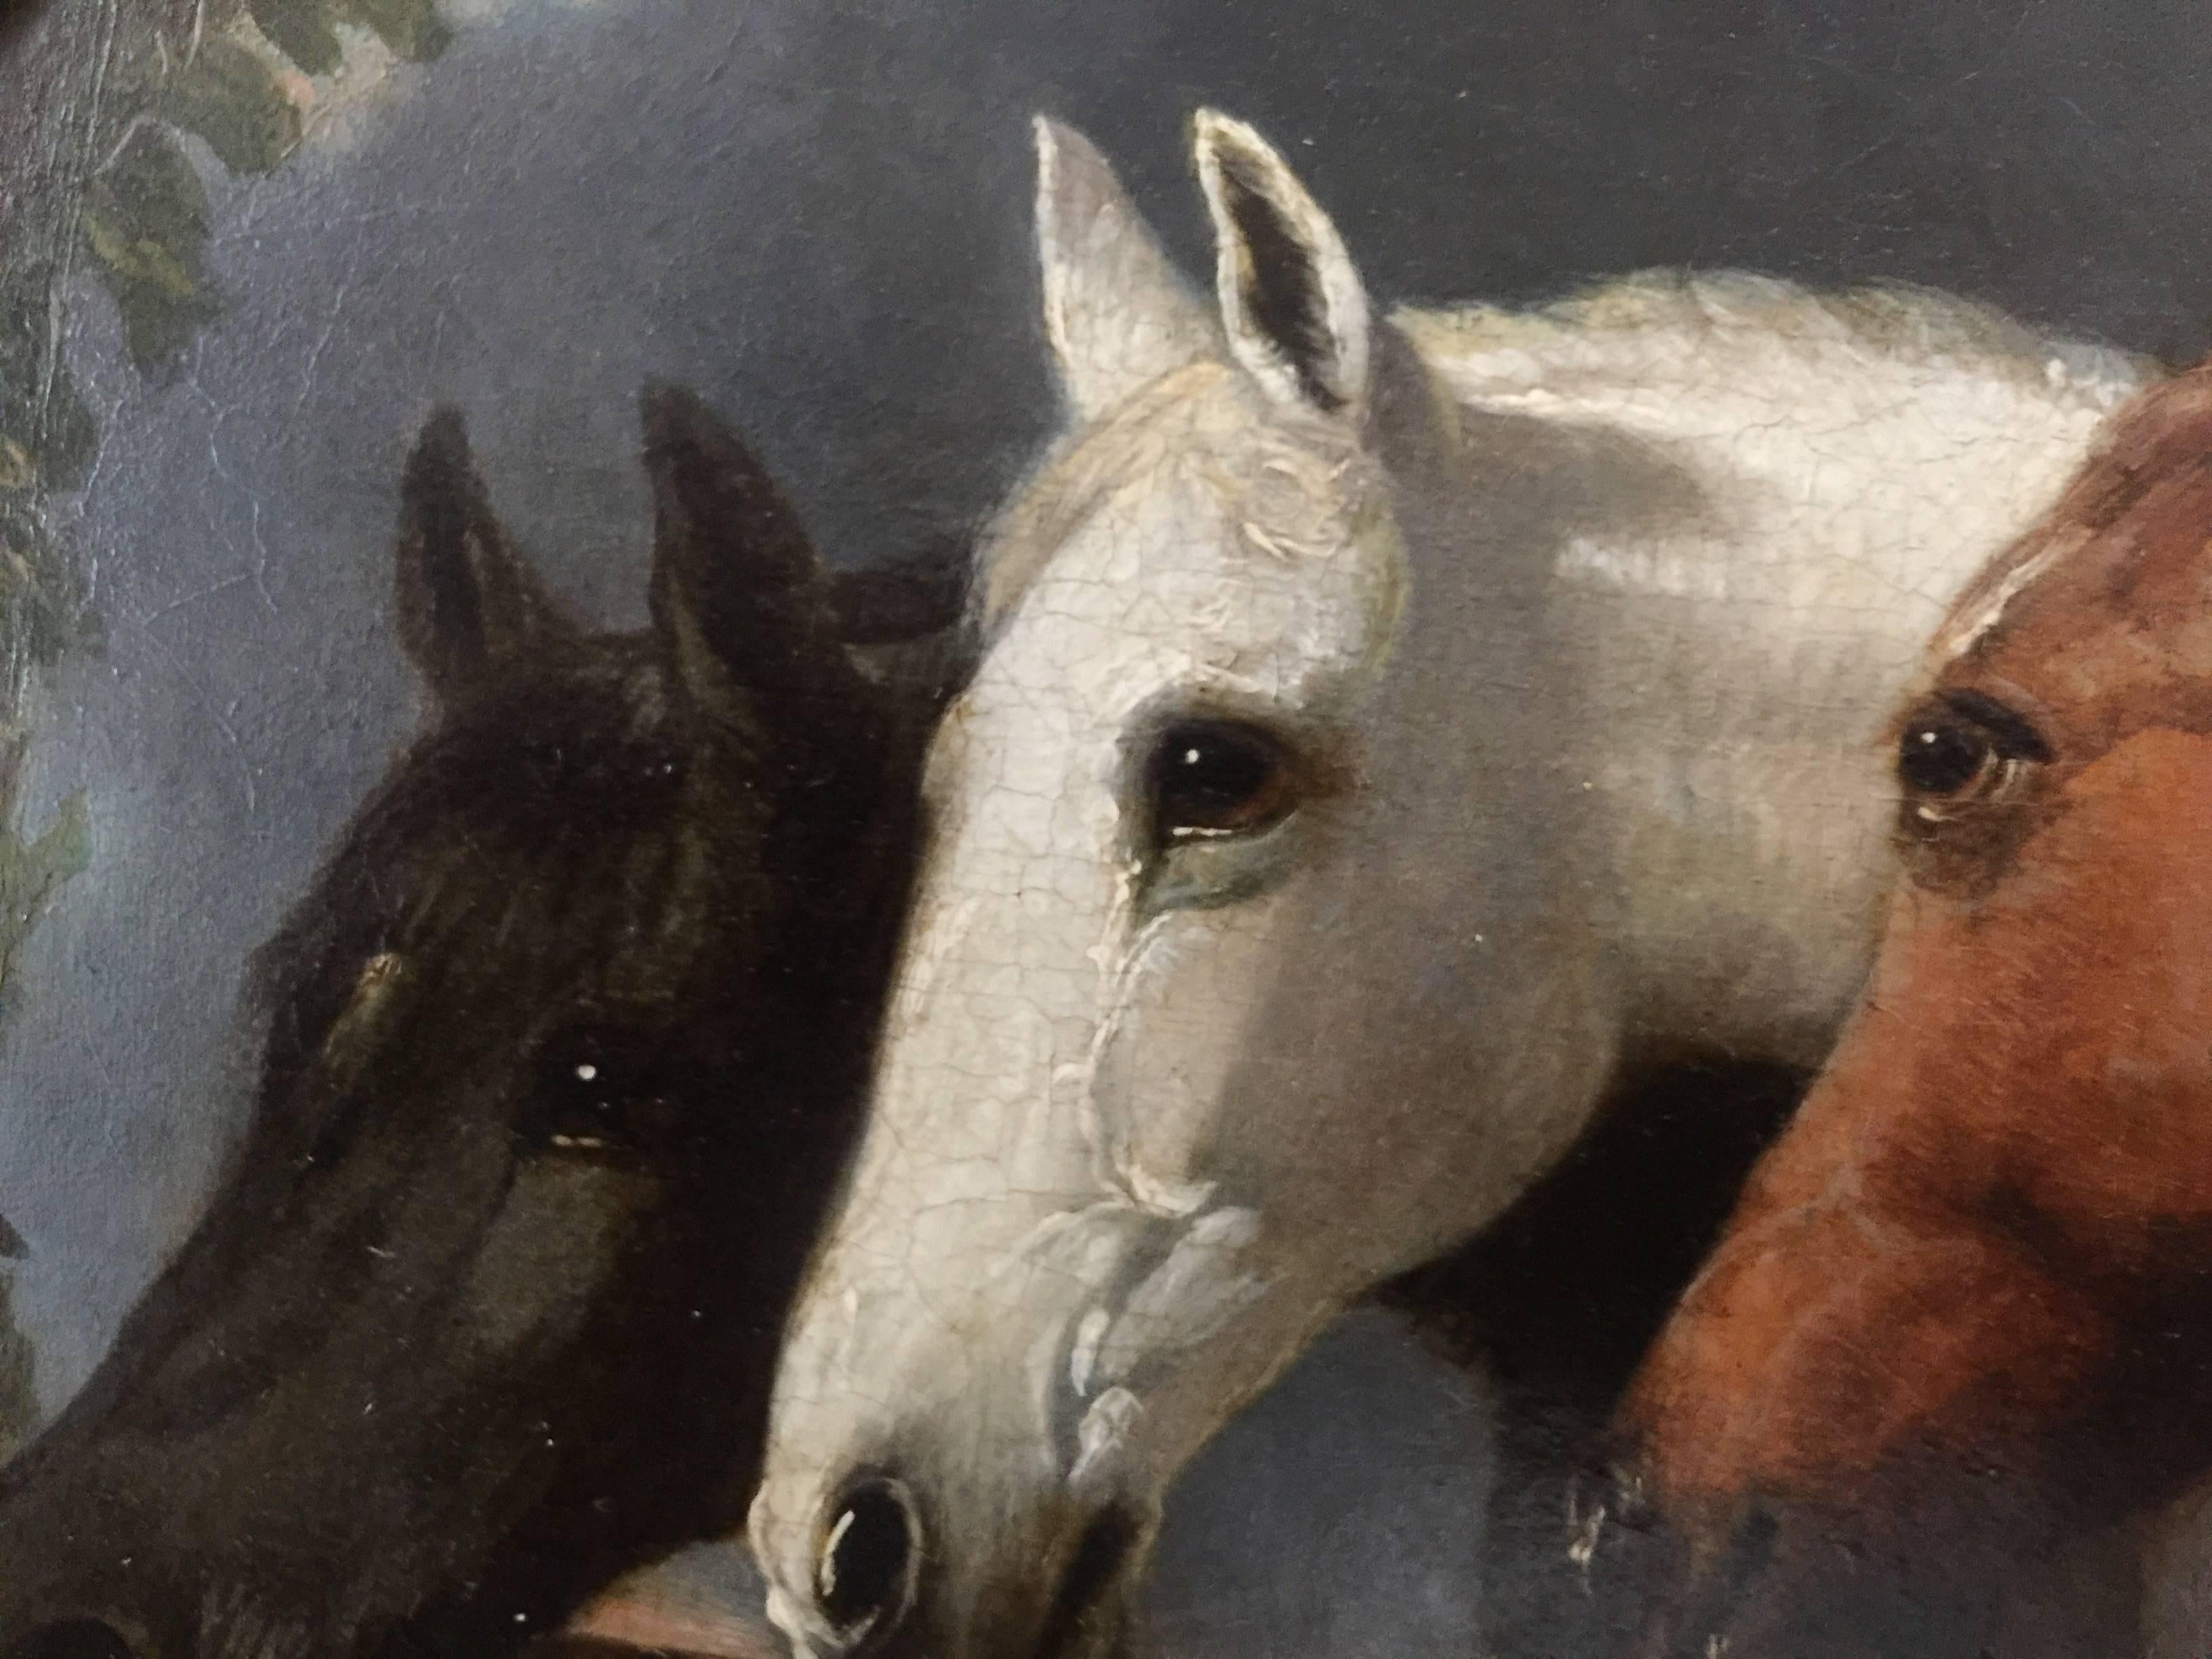 Three English Horse Heads in a stable - Victorian Painting by John Frederick Herring Jr.